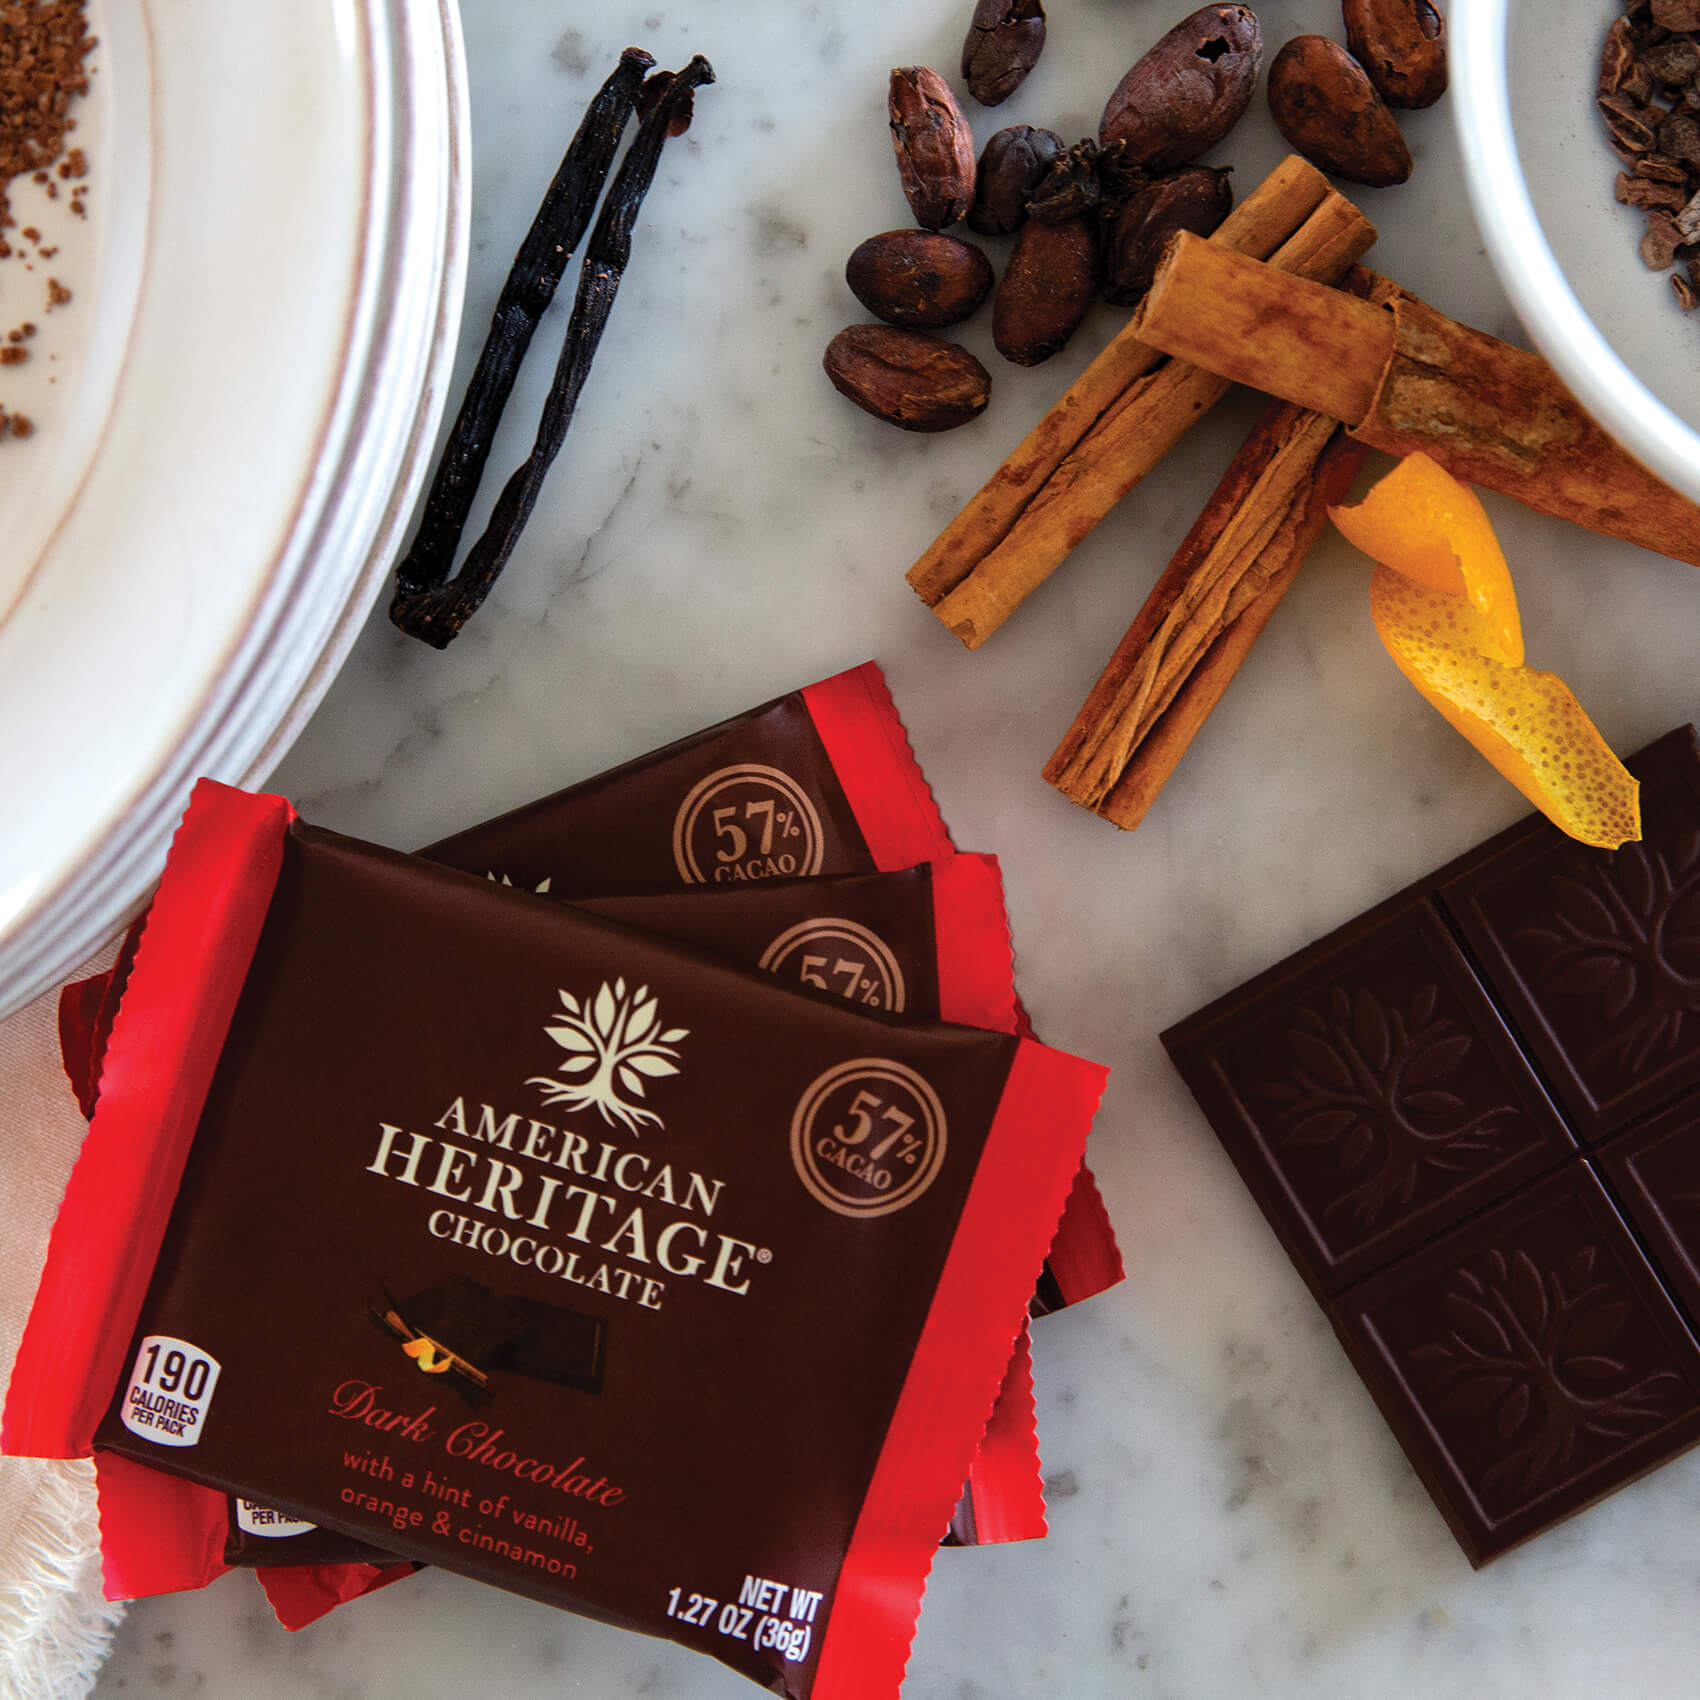 AMERICAN HERITAGE Chocolate Tablet Bars - Lifestyle Image of bars on a table with ingredients